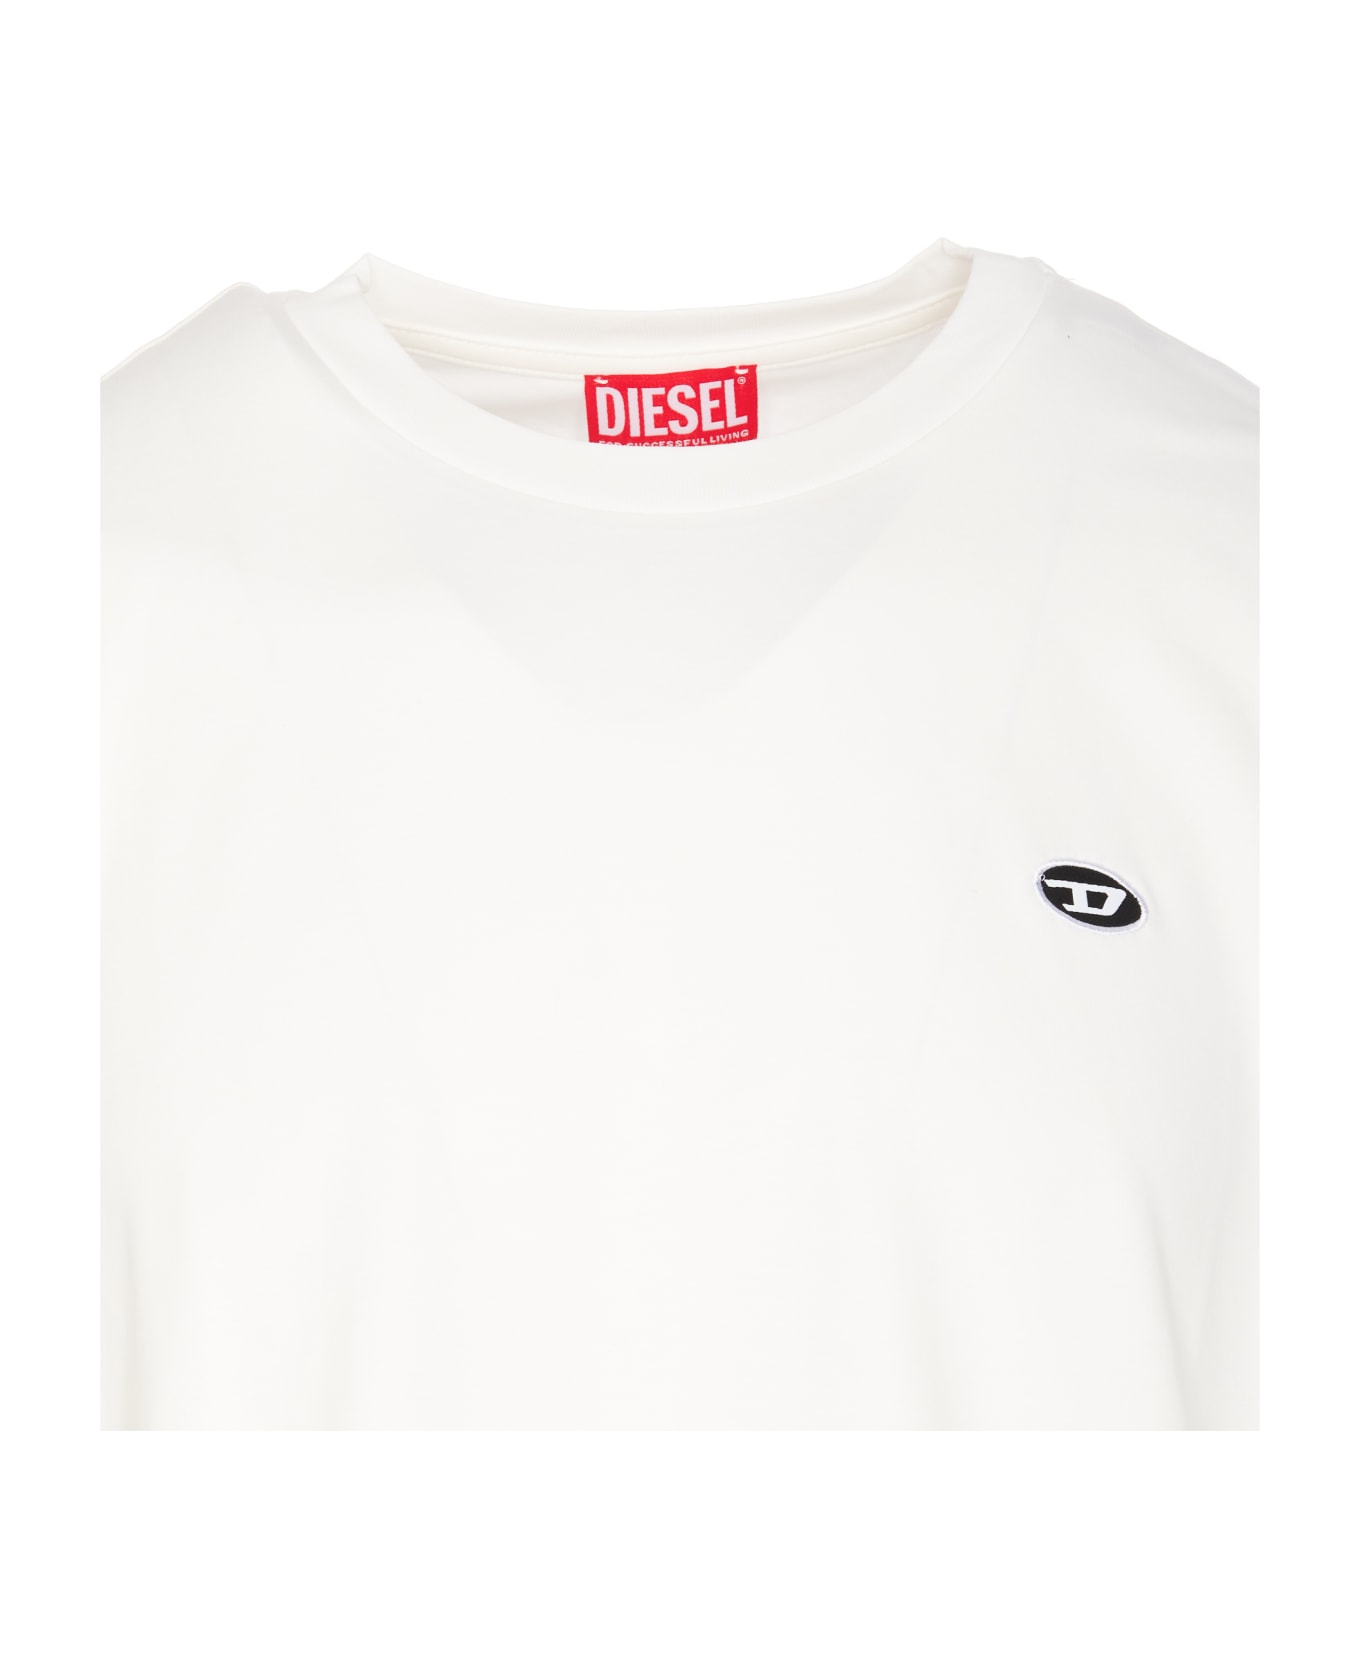 Diesel T-just Doval T-shirt - White